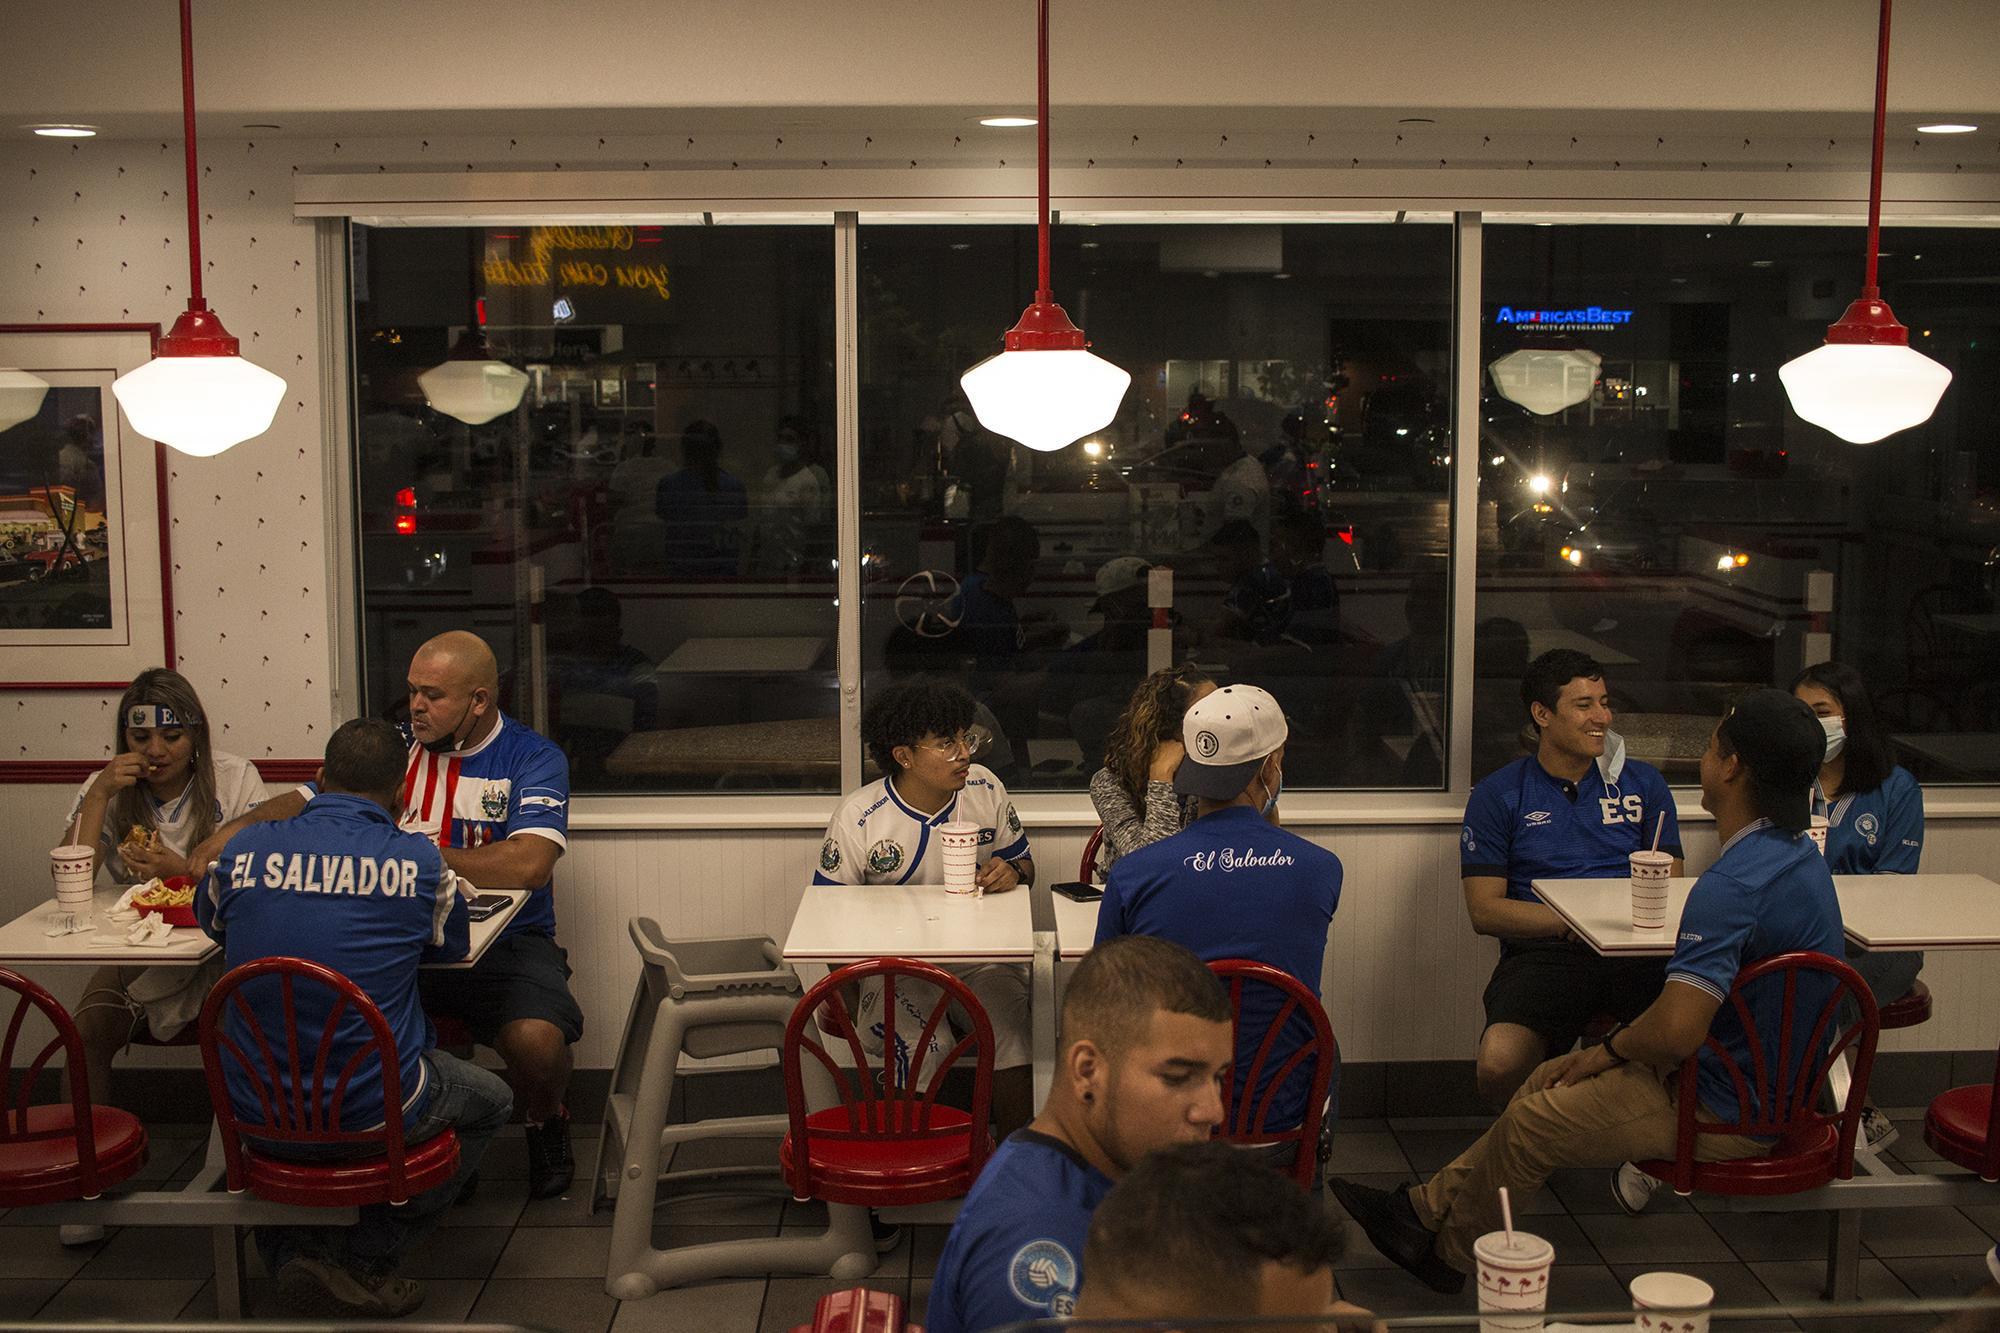 Fans meet at In-N-Out Burger in Carson, California, near the stadium where La Selecta played against Costa Rica. It's the only business open at 12:30 in the morning and Salvadorans packed the place like they did the stadium just hours before.